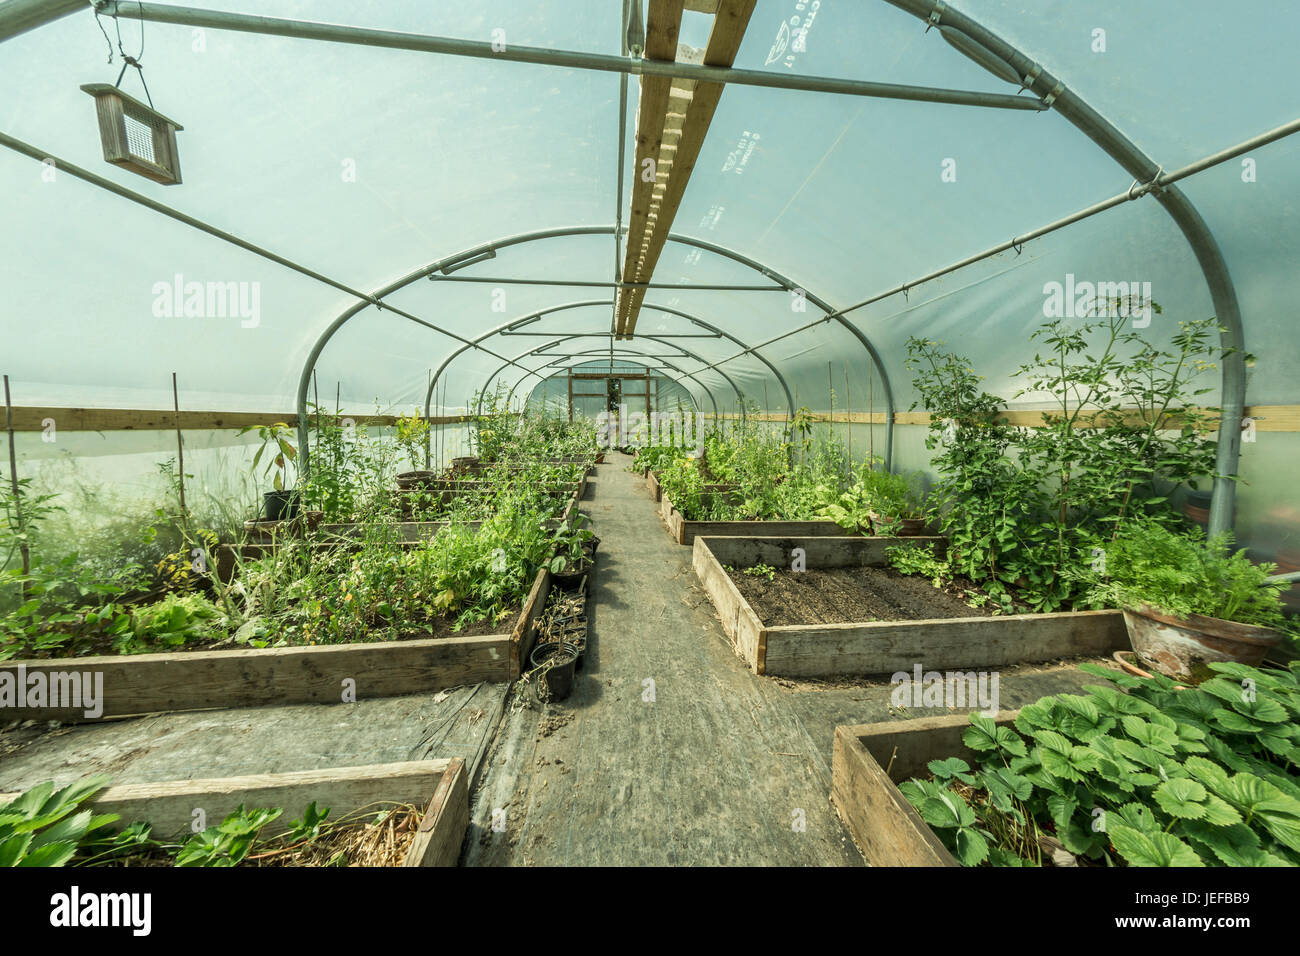 Wide-angle fisheye view inside a polytunnel growing vegetables - possible metaphor for concept of self-sufficiency, being self-reliant, grow your own. Stock Photo